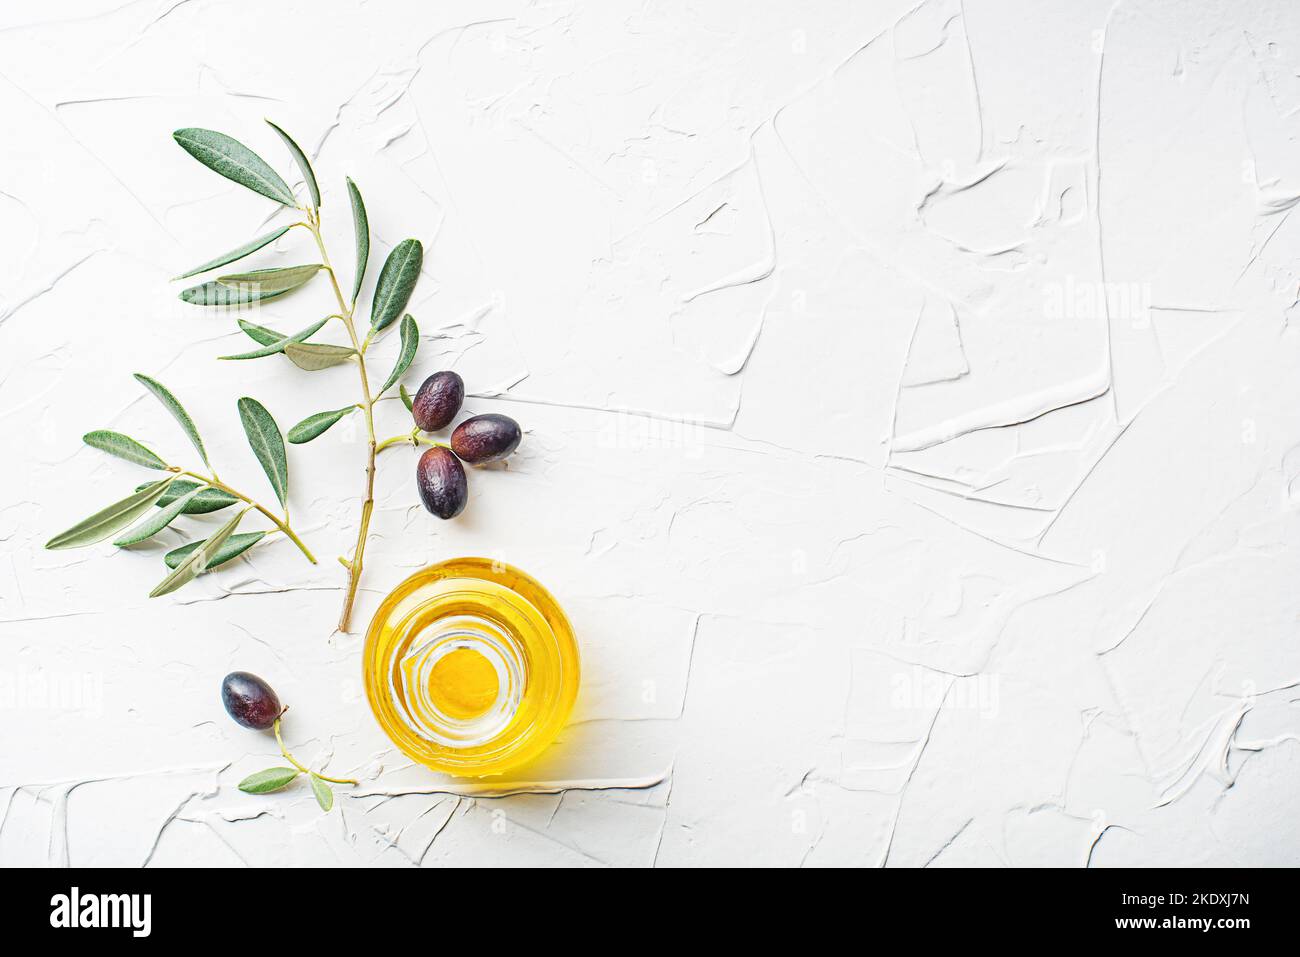 Olive oil bottle and olive branch on white background Stock Photo